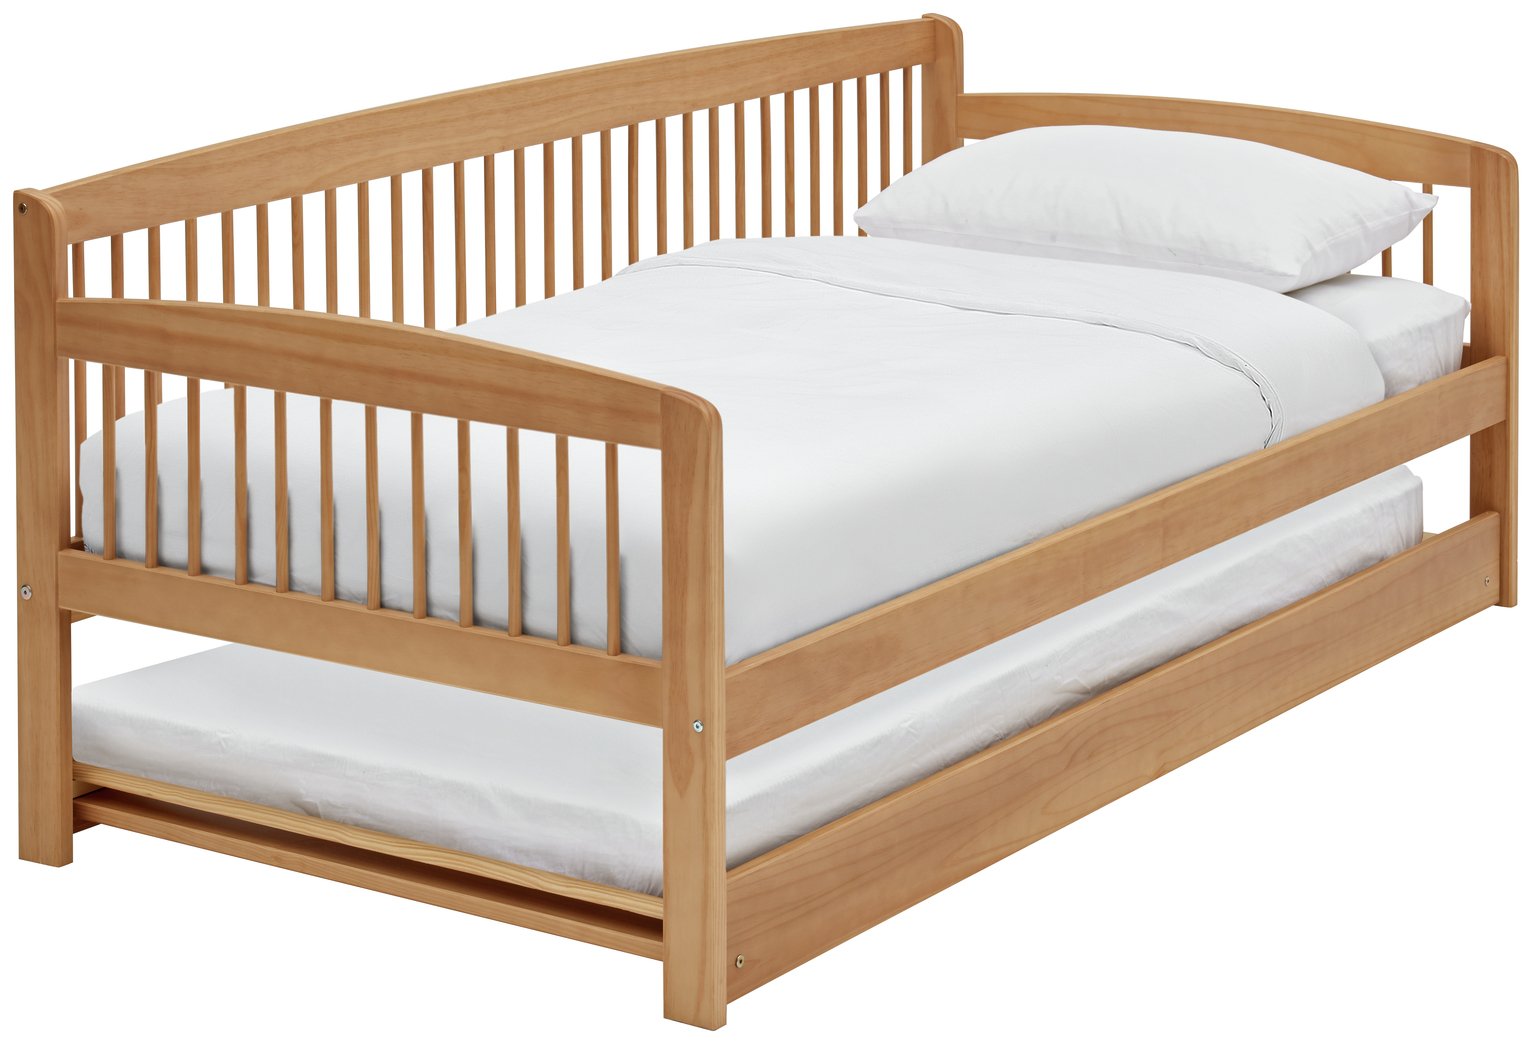 Argos Home Andover Day Bed w/ Trundle & 2 Mattresses - Pine